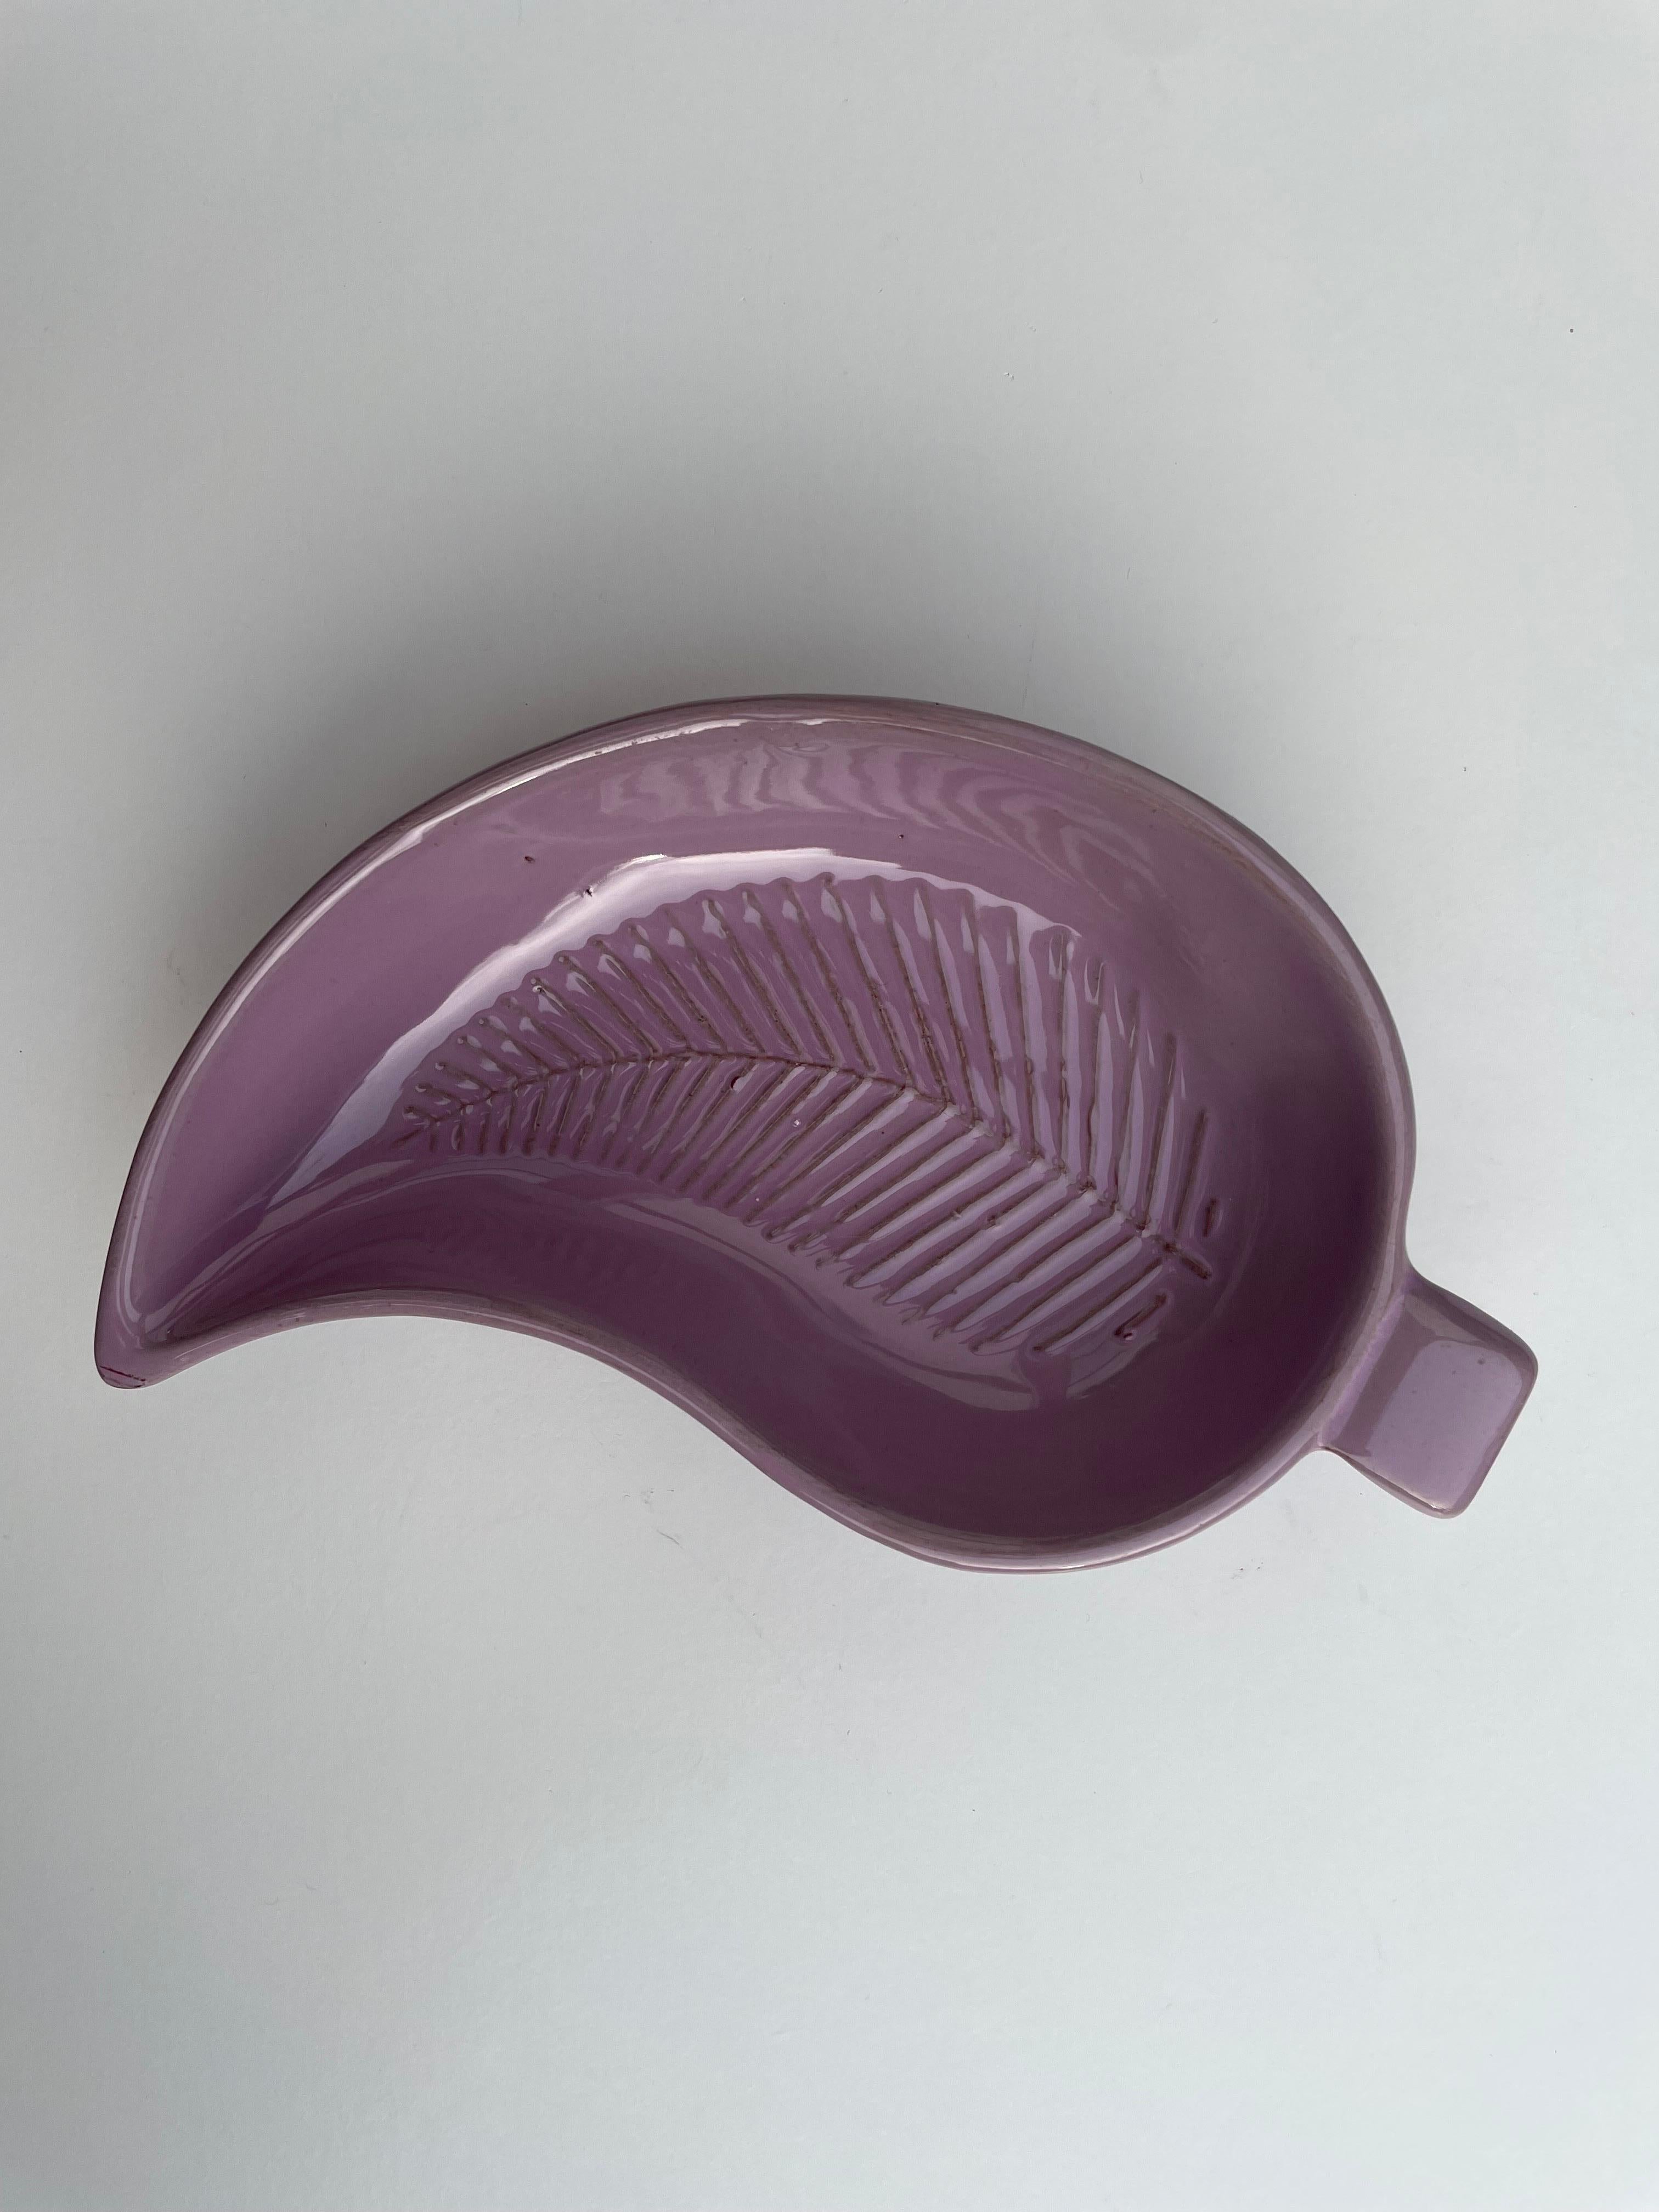 Hand-Crafted Scandinavian Modern Lilac Leaf Ceramic Vide Poche Dish, 1960s For Sale